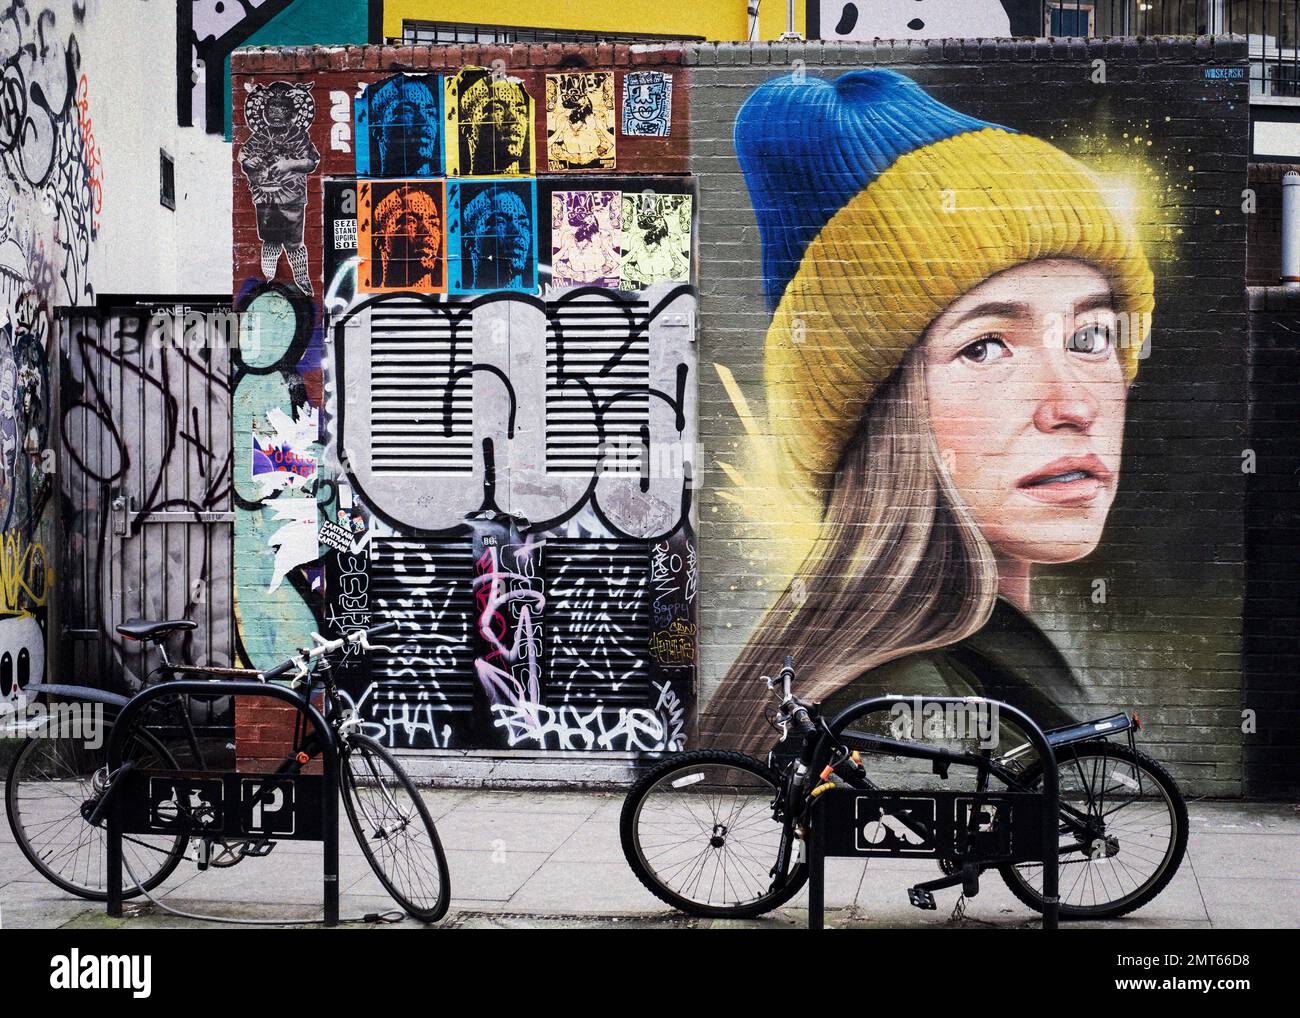 Artful graffiti portrait at Shoreditch East London with parked bicycles in foreground Stock Photo